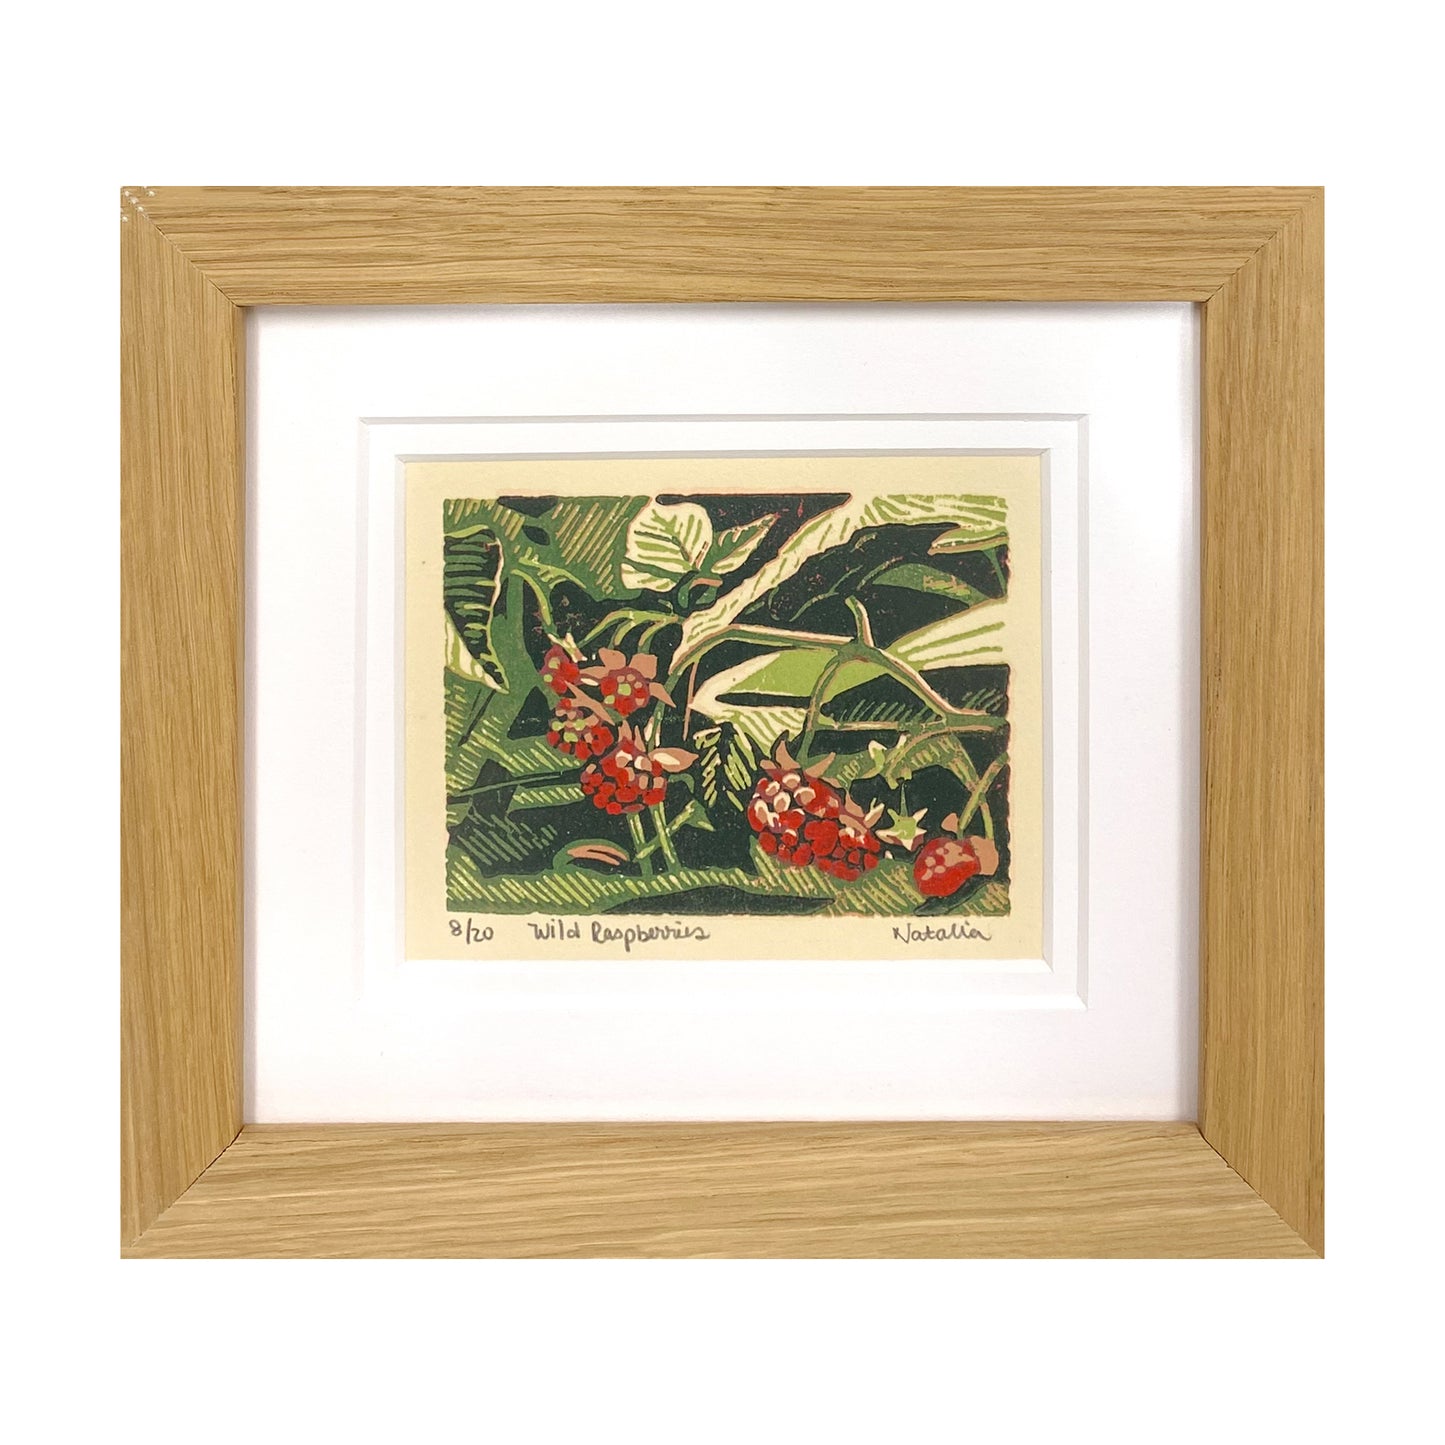 Wild Raspberries.  A signed, original reduction multi-color block print carved and printed in Michigan by Natalia Wohletz of Peninsula Prints.